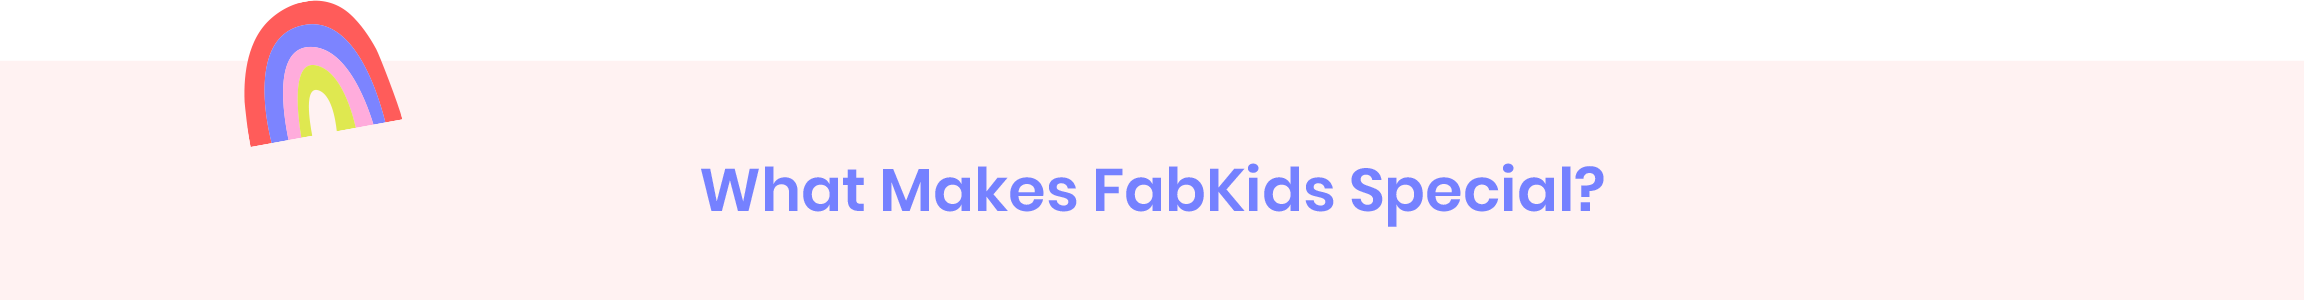 What makes FabKids special